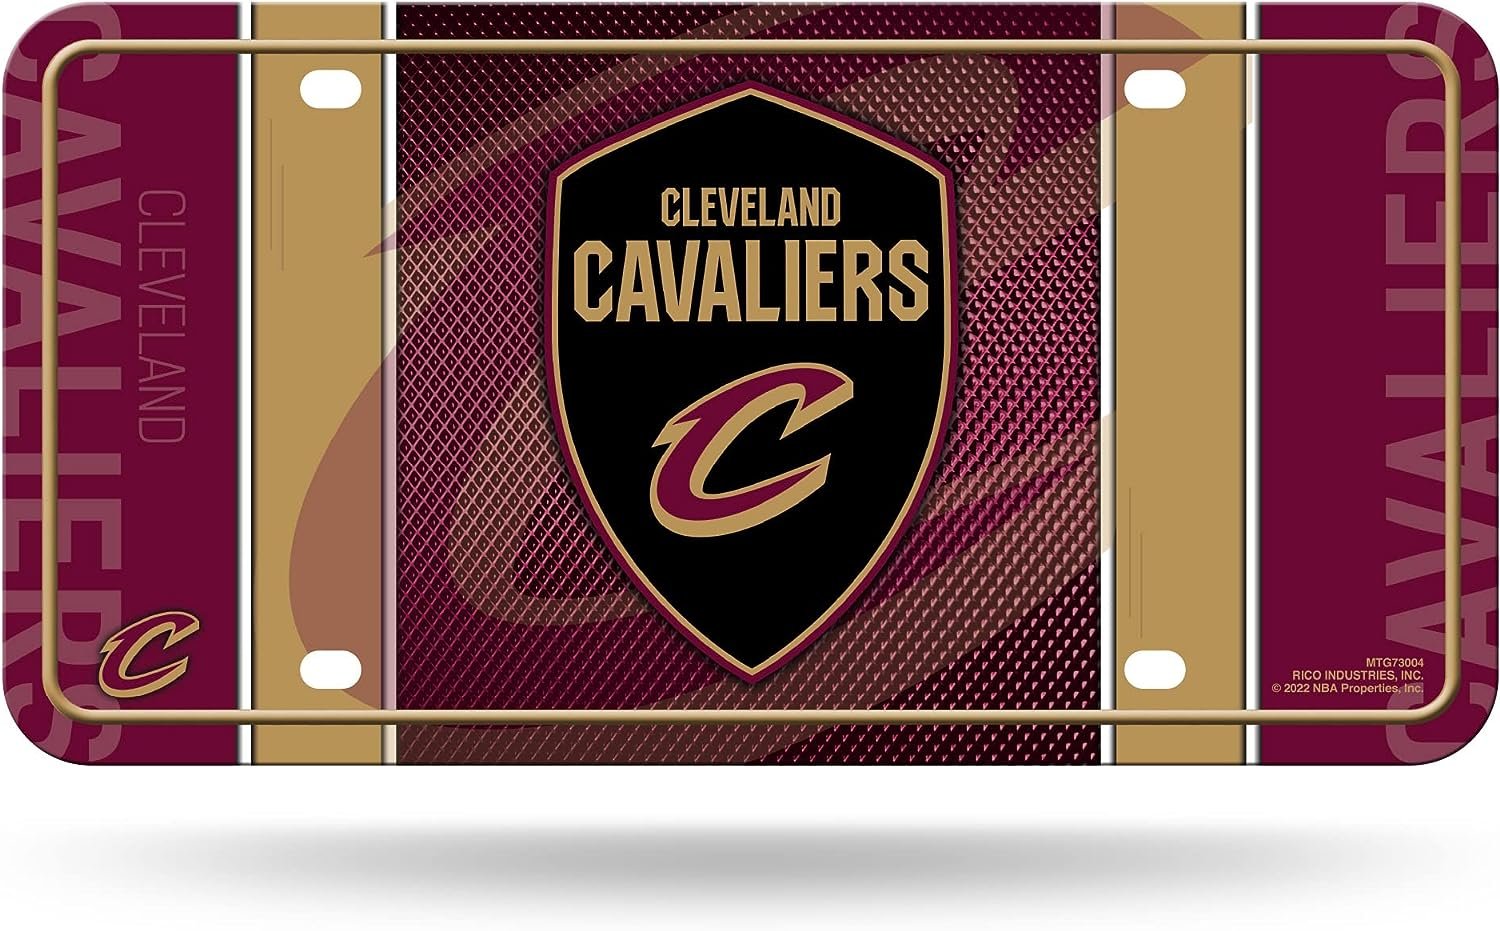 Cleveland Cavaliers Metal Tag License Plate 6x12 Inch, Jersey Design